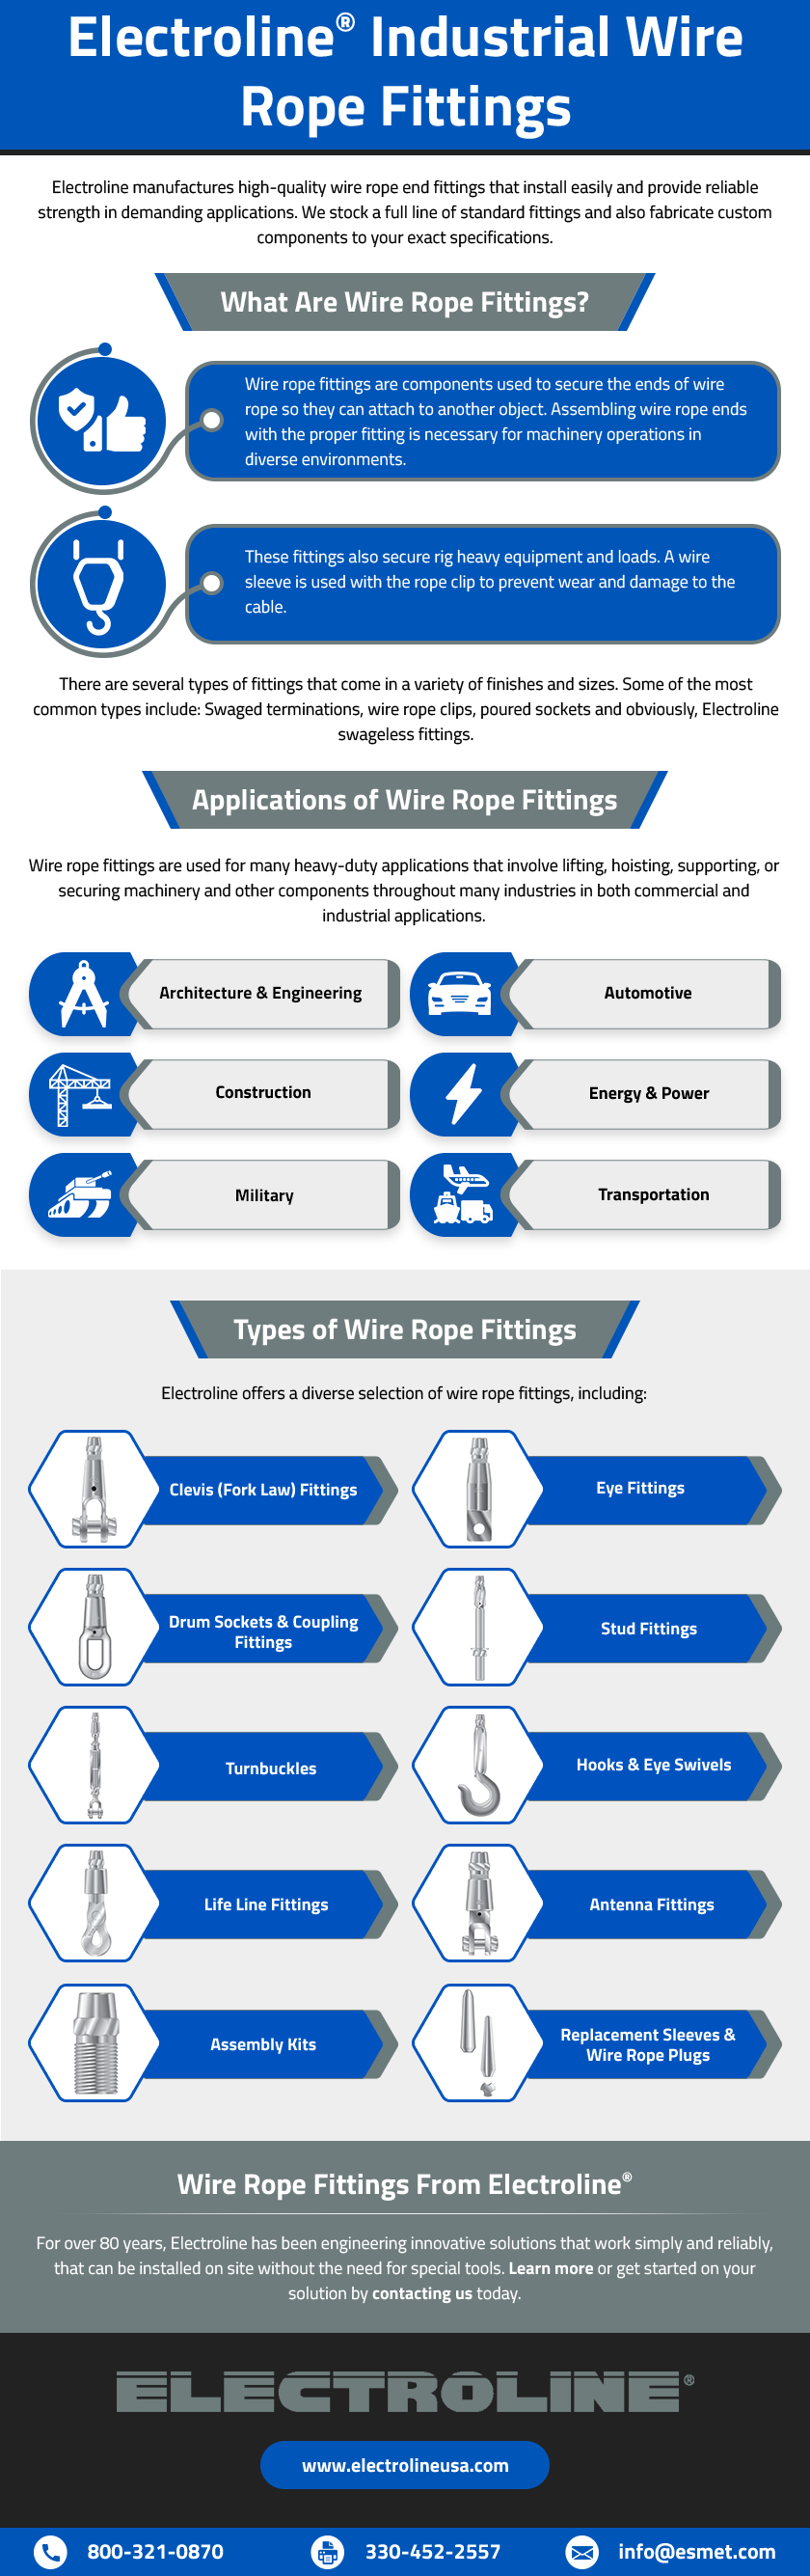 Electroline® Industrial Wire Rope Fittings